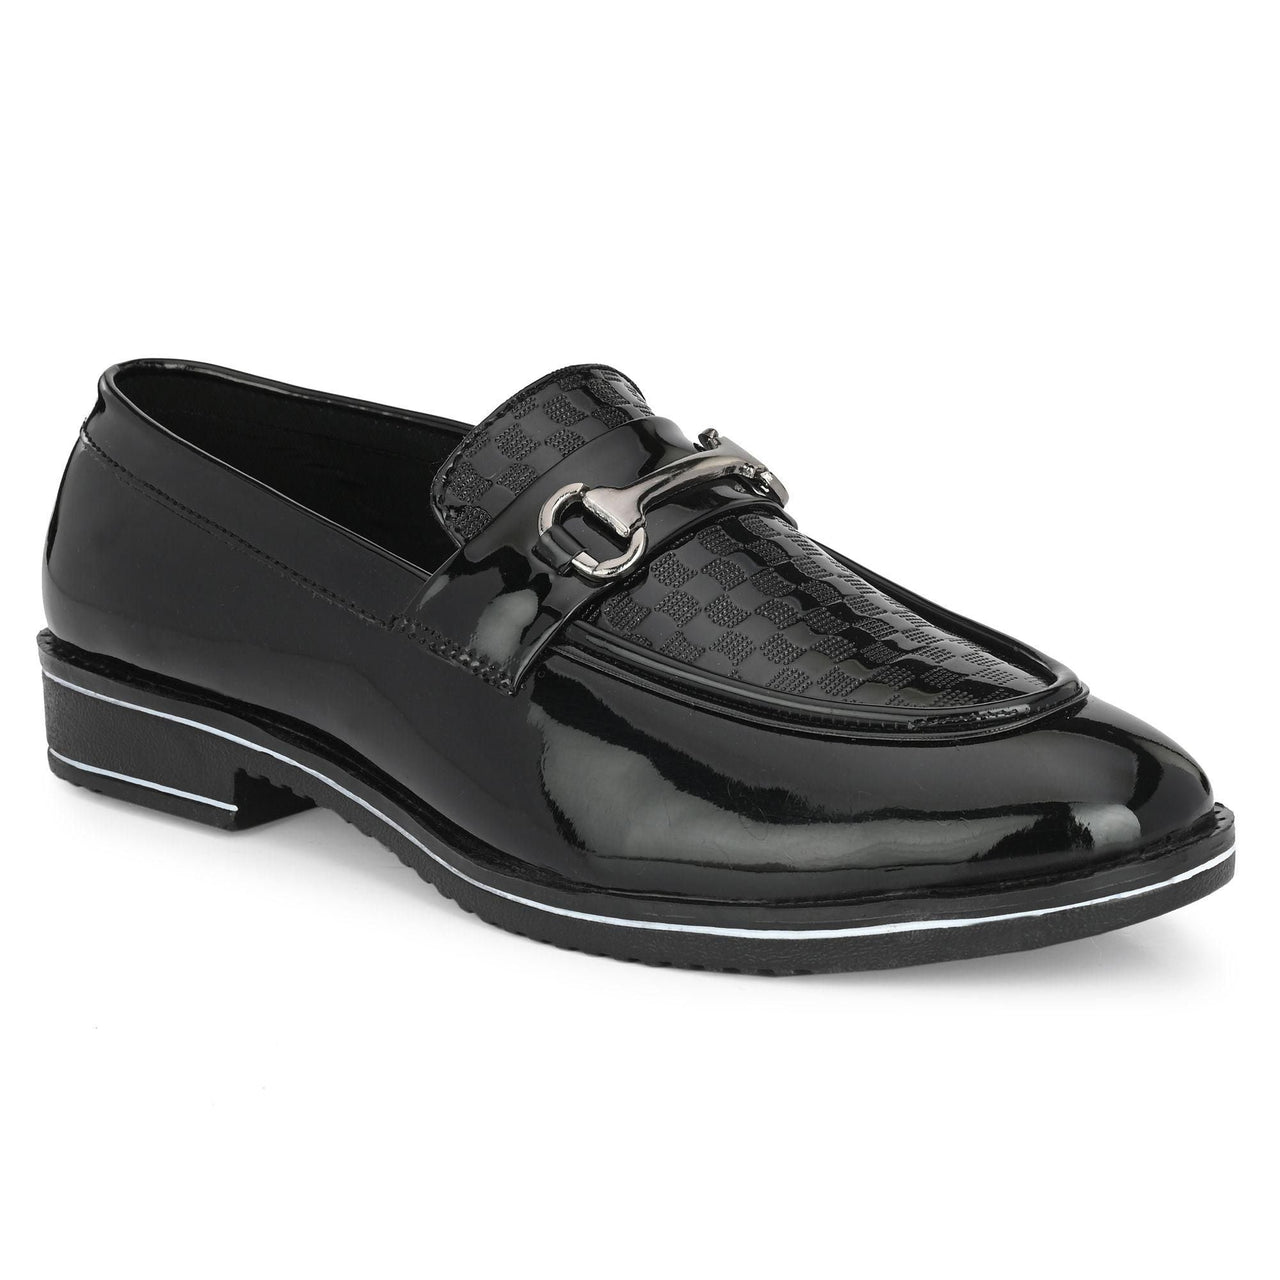 AIRBELL Men's Black Solid Patent foam Outdoor casual Loafers